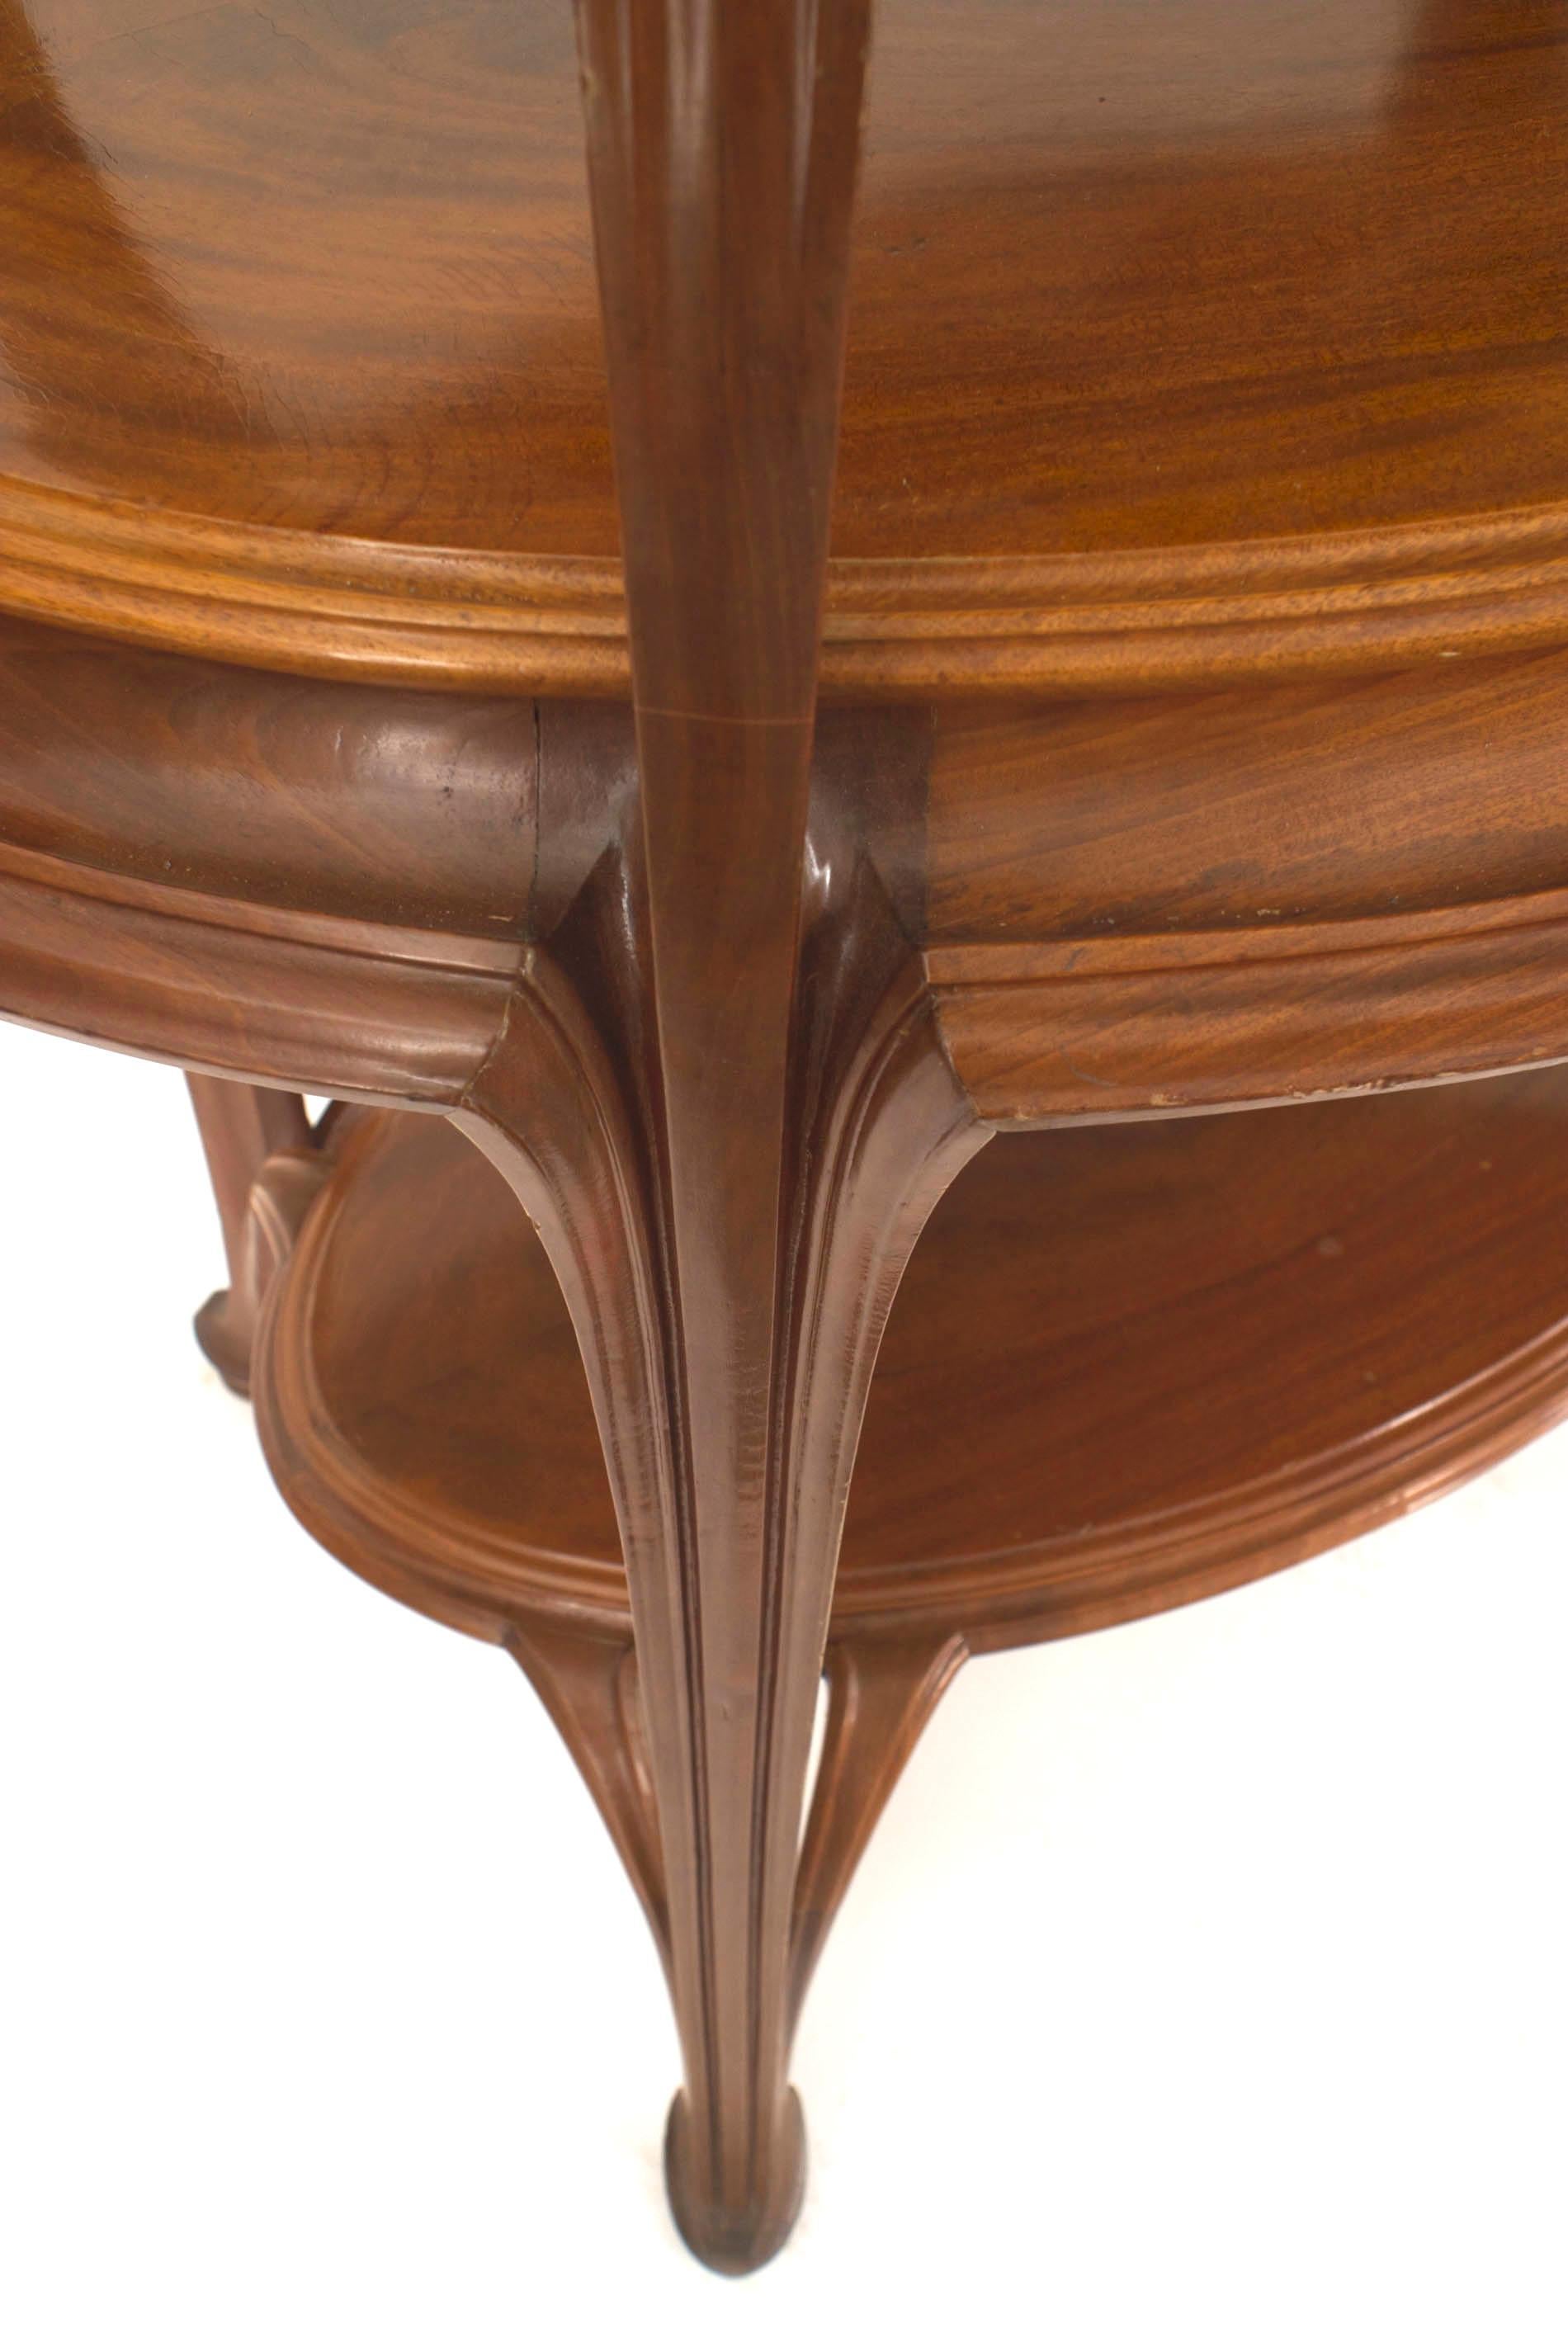 French Art Nouveau walnut three tier etagere table with oval top and shelves and carved floral trim corners.
